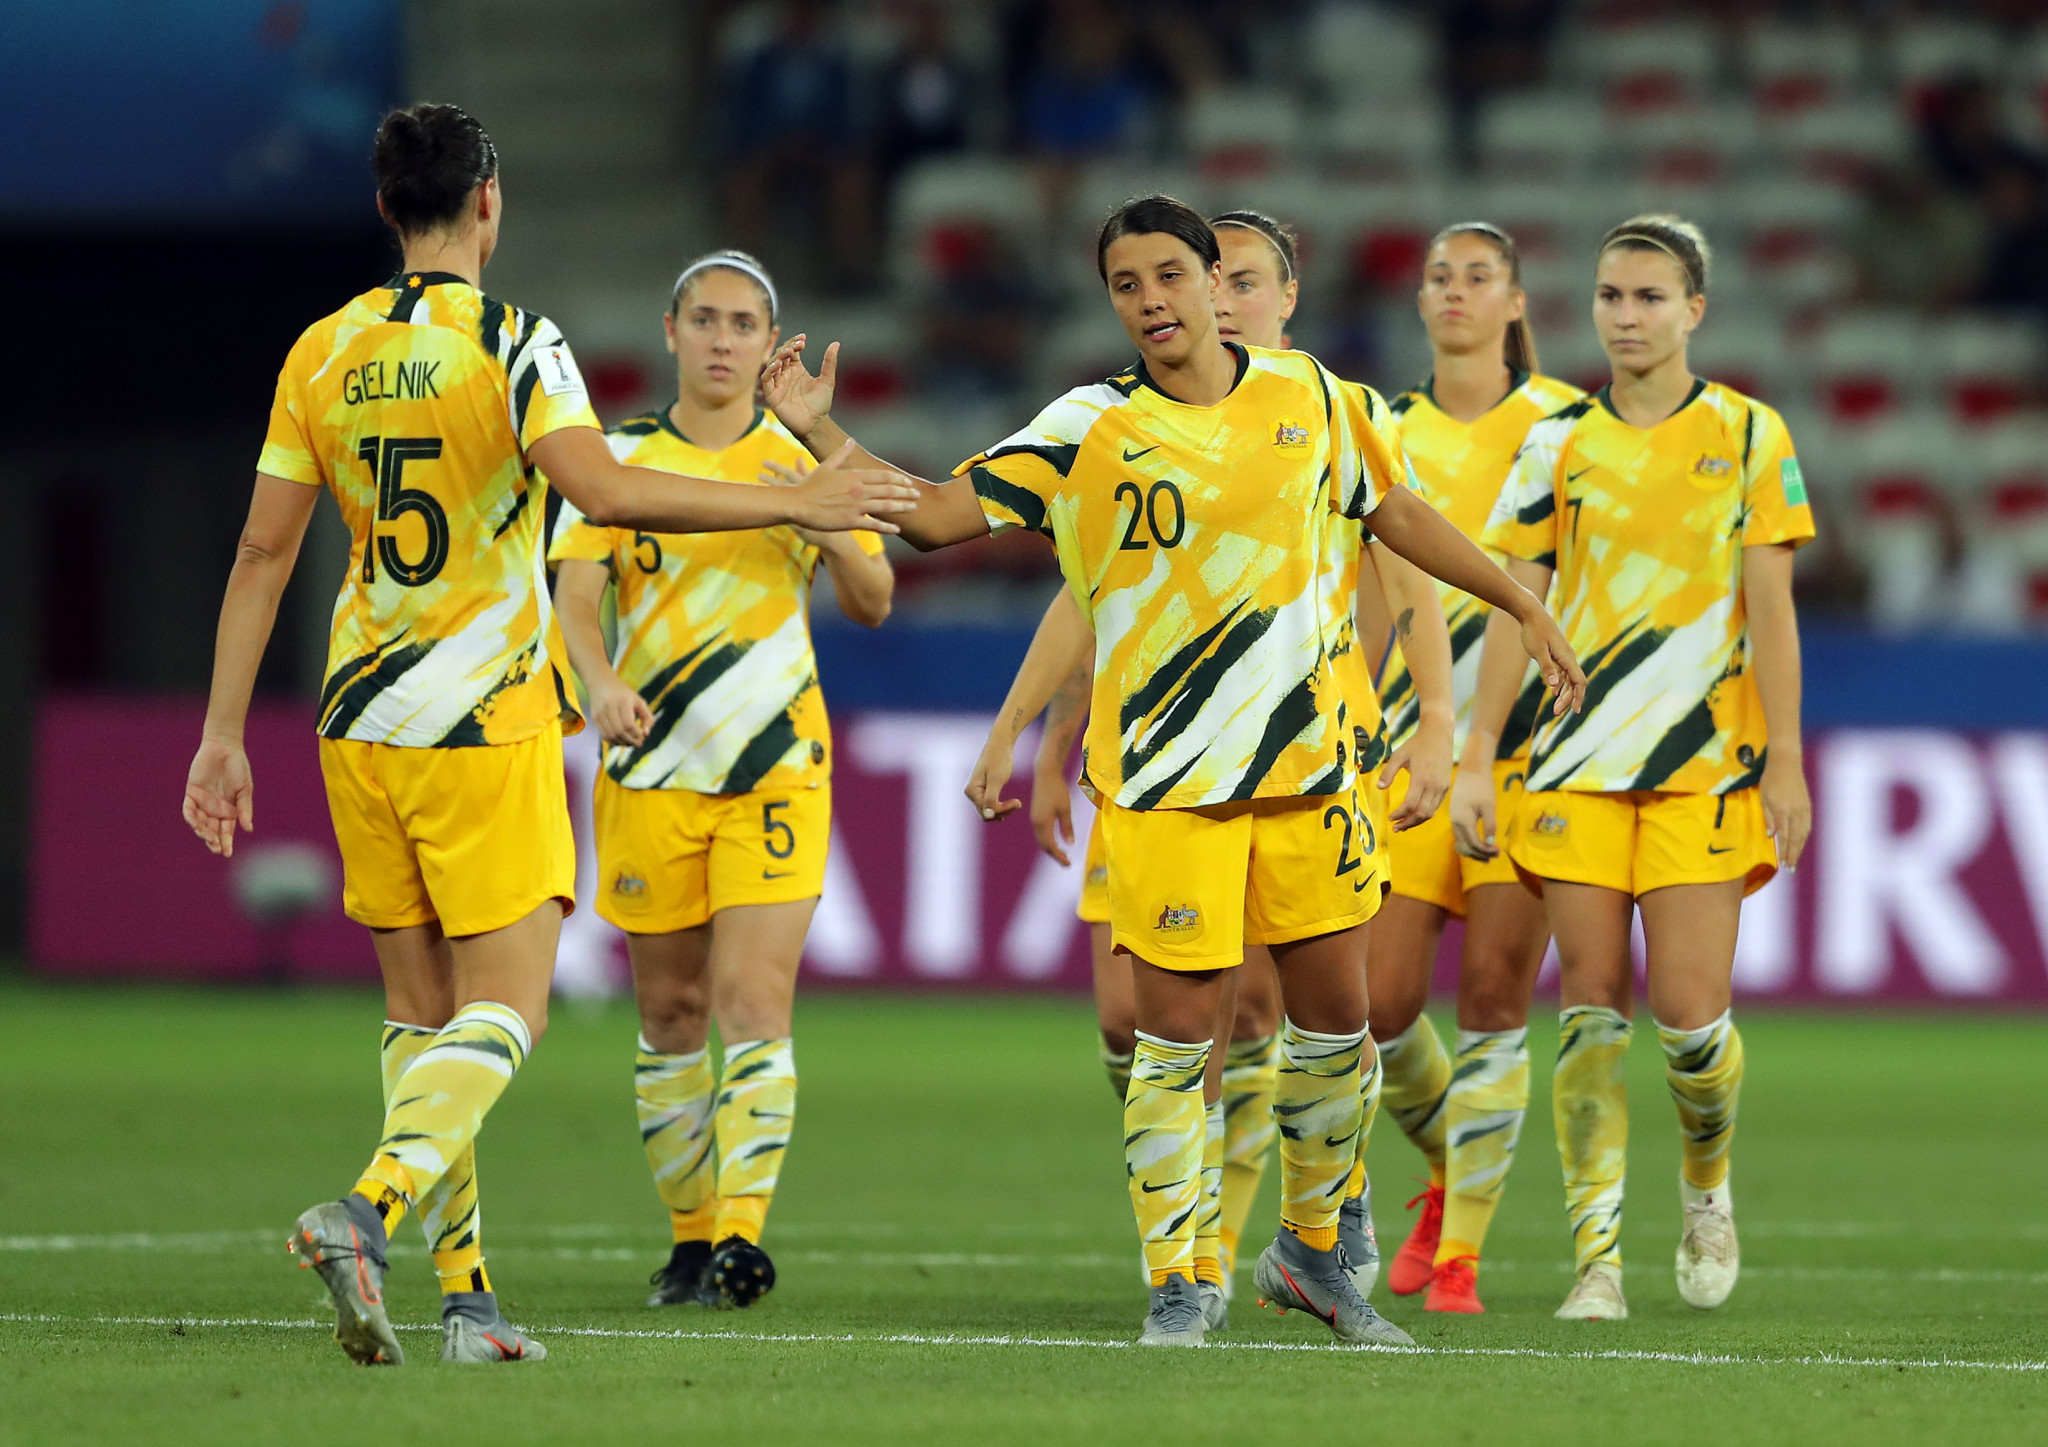 Australia have competed in the FIFA Women's World Cup seven times and reached the last 16 at France 2019 ©Getty Images